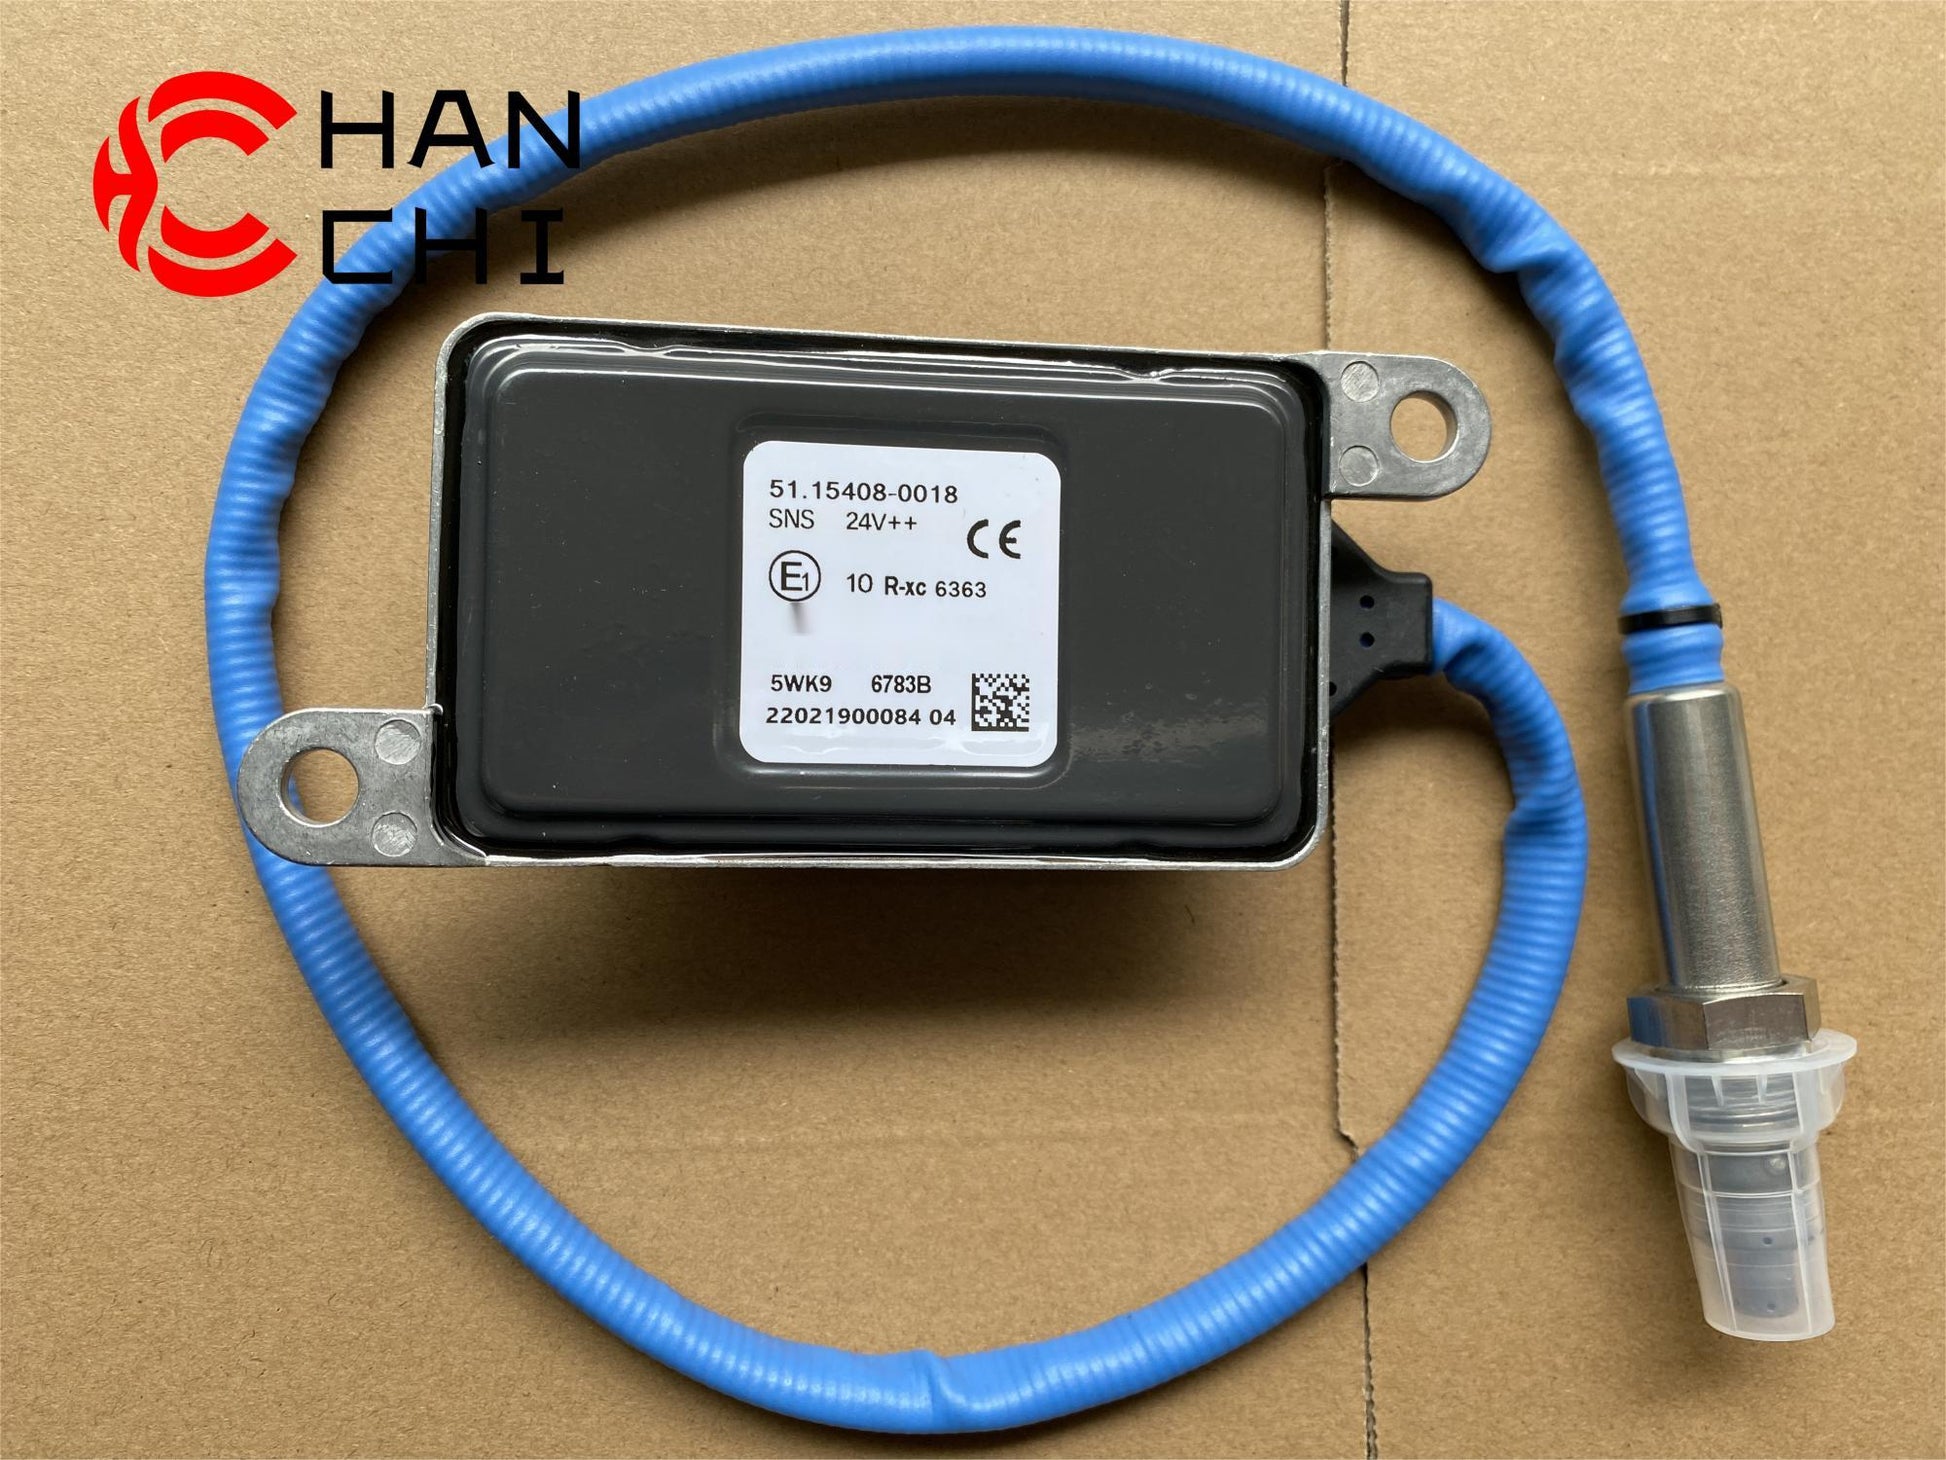 OEM: 51.15408-0018 5WK96783BMaterial: ABS metalColor: black silverOrigin: Made in ChinaWeight: 400gPacking List: 1* Nitrogen oxide sensor NOx More ServiceWe can provide OEM Manufacturing serviceWe can Be your one-step solution for Auto PartsWe can provide technical scheme for you Feel Free to Contact Us, We will get back to you as soon as possible.